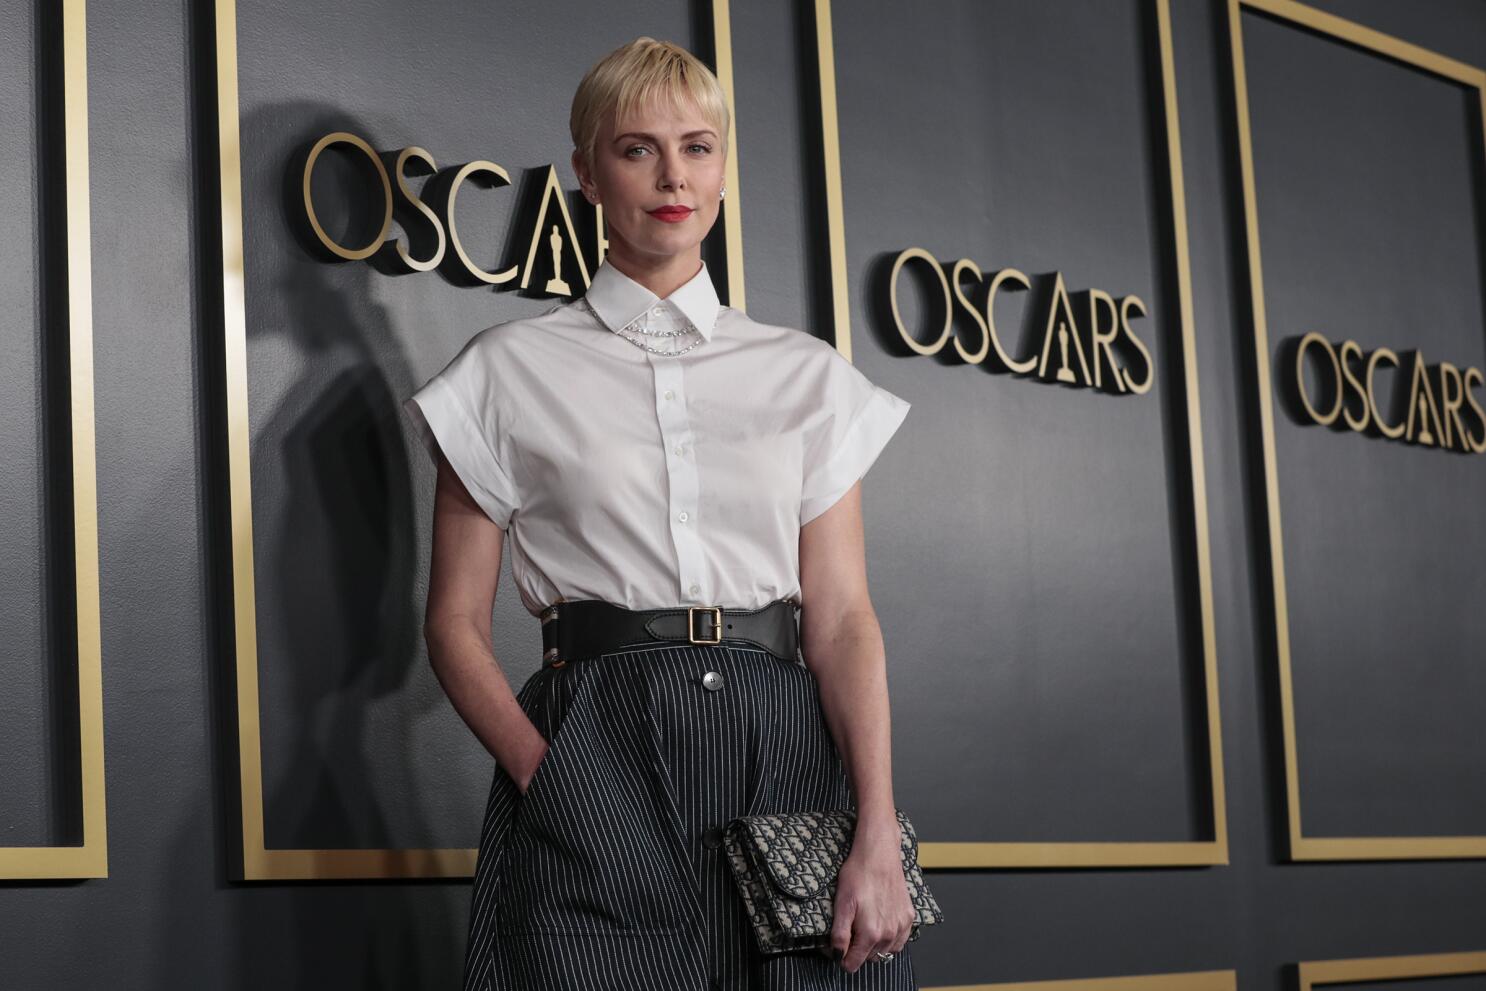 Oscars 2020: Charlize Theron goes for the fashion gold - Los